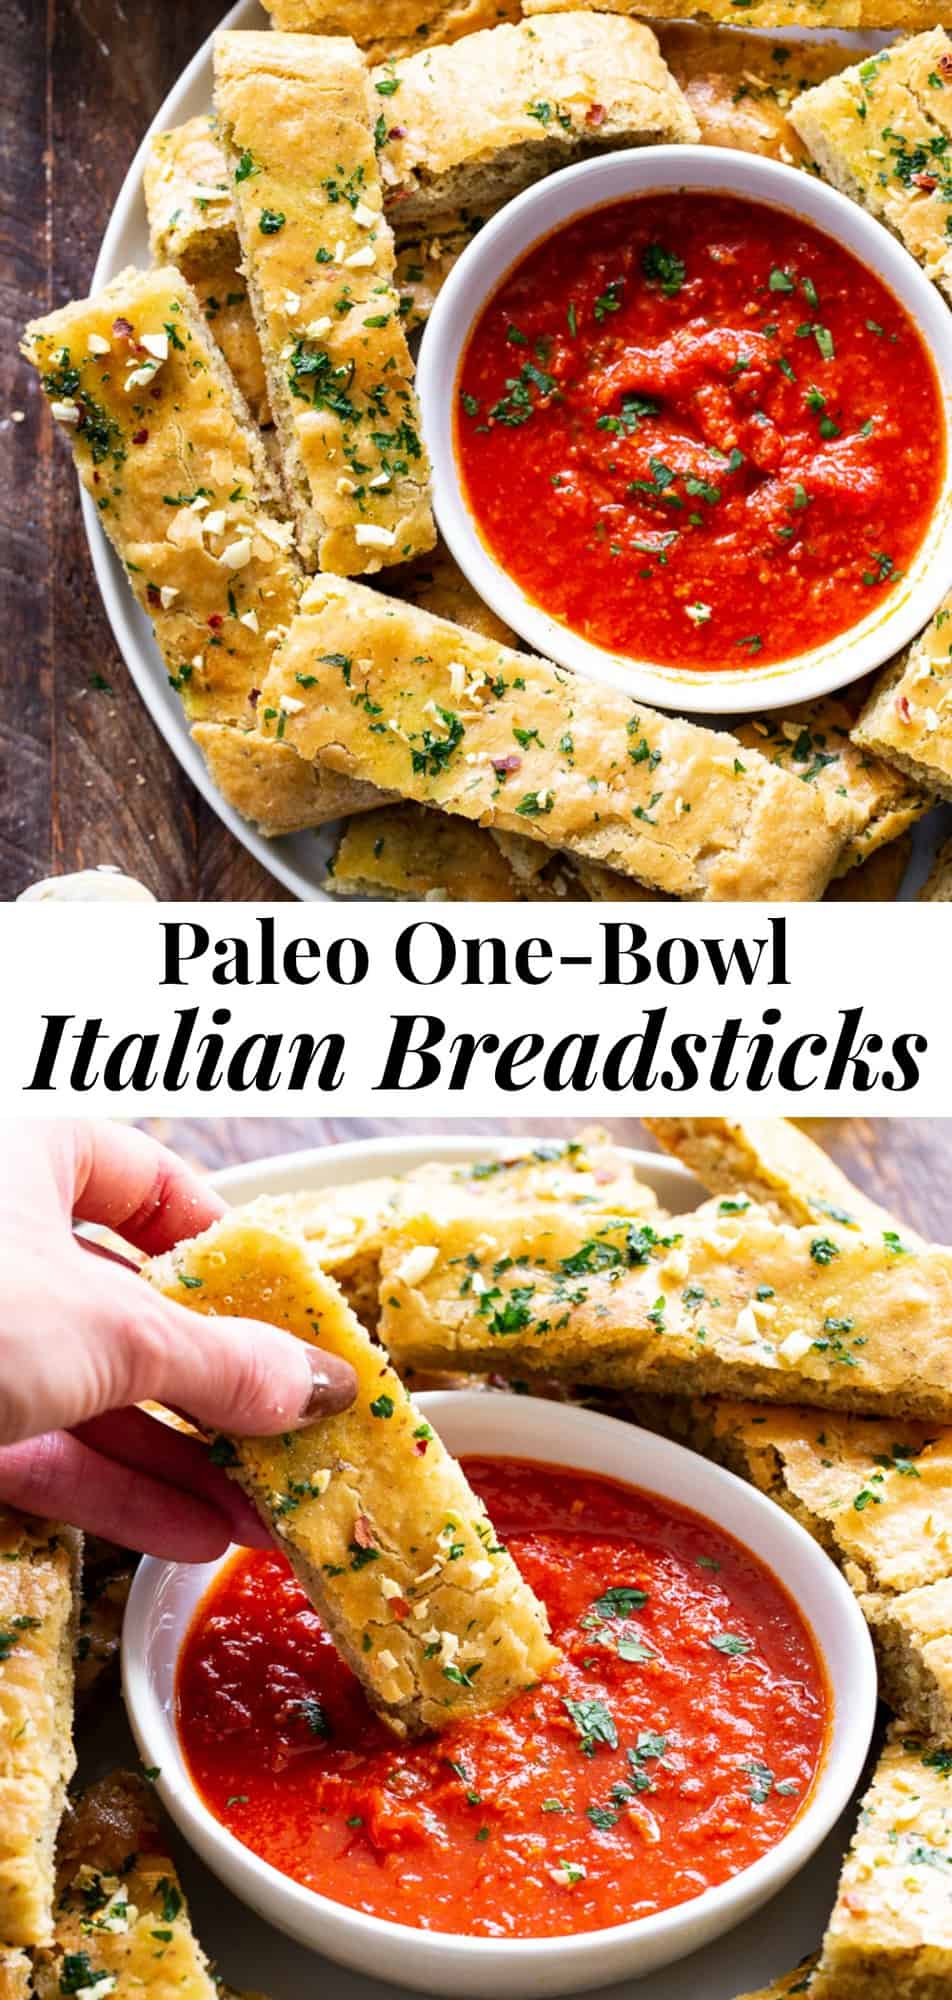 These easy, one bowl Paleo breadsticks are loaded with flavor, Italian herbs and garlic, and have the perfect chewy texture.  They're great when you’re craving bread but want to keep things clean!  Gluten-free, grain free, dairy free and perfect for dipping.